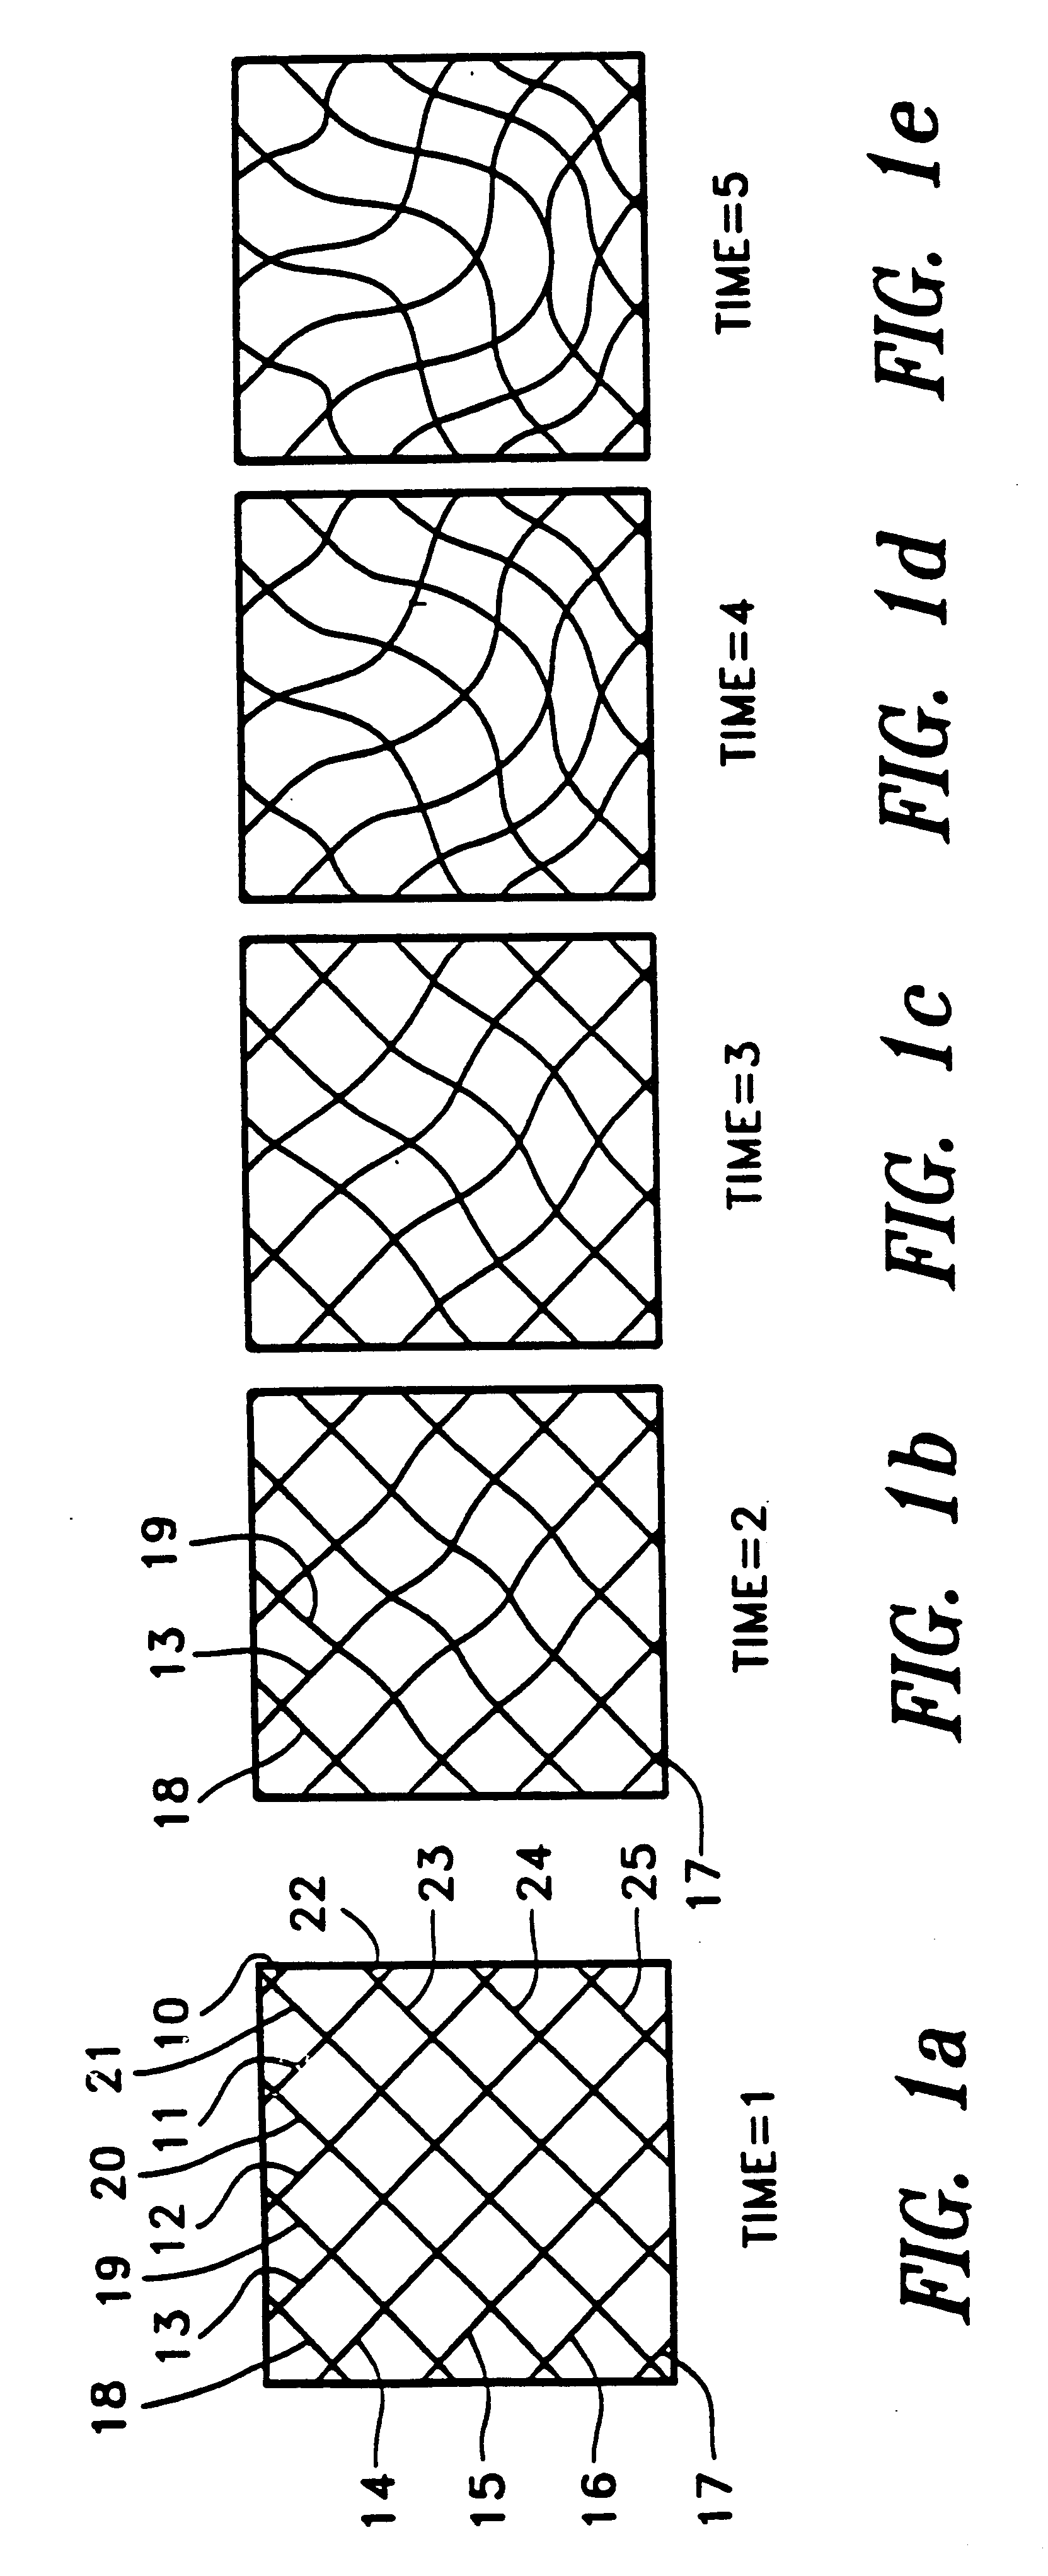 Apparatus and method for dynamic modeling of an object